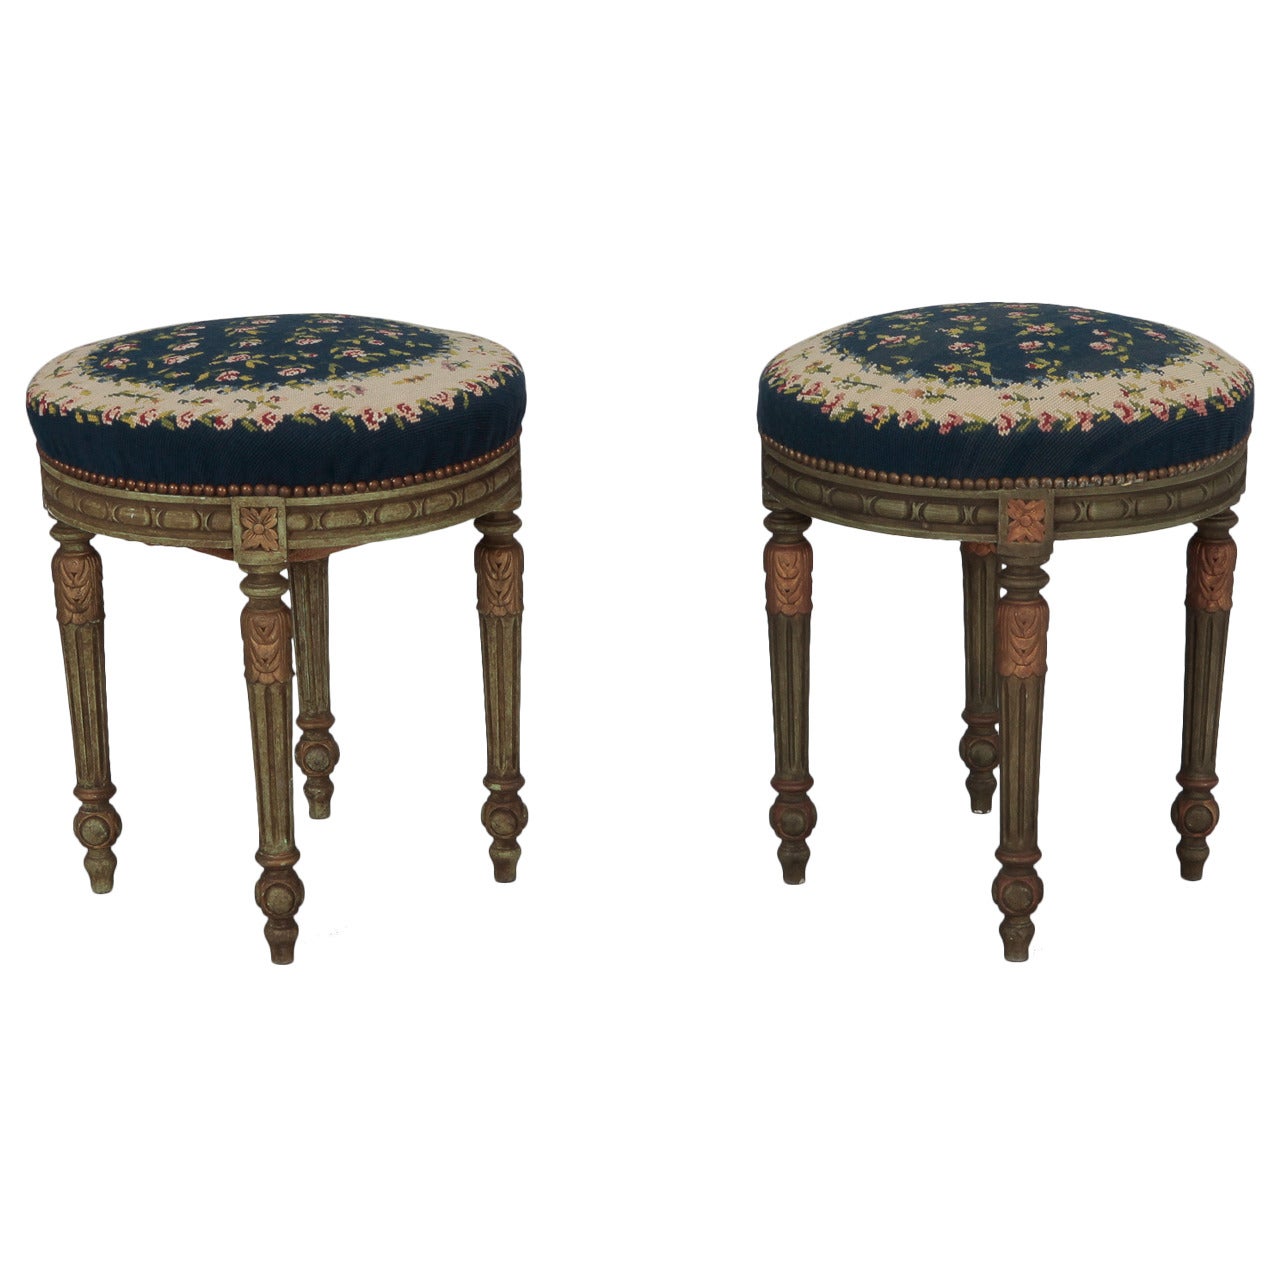 Pair of French Round Stools with Blue Needlework Upholstery